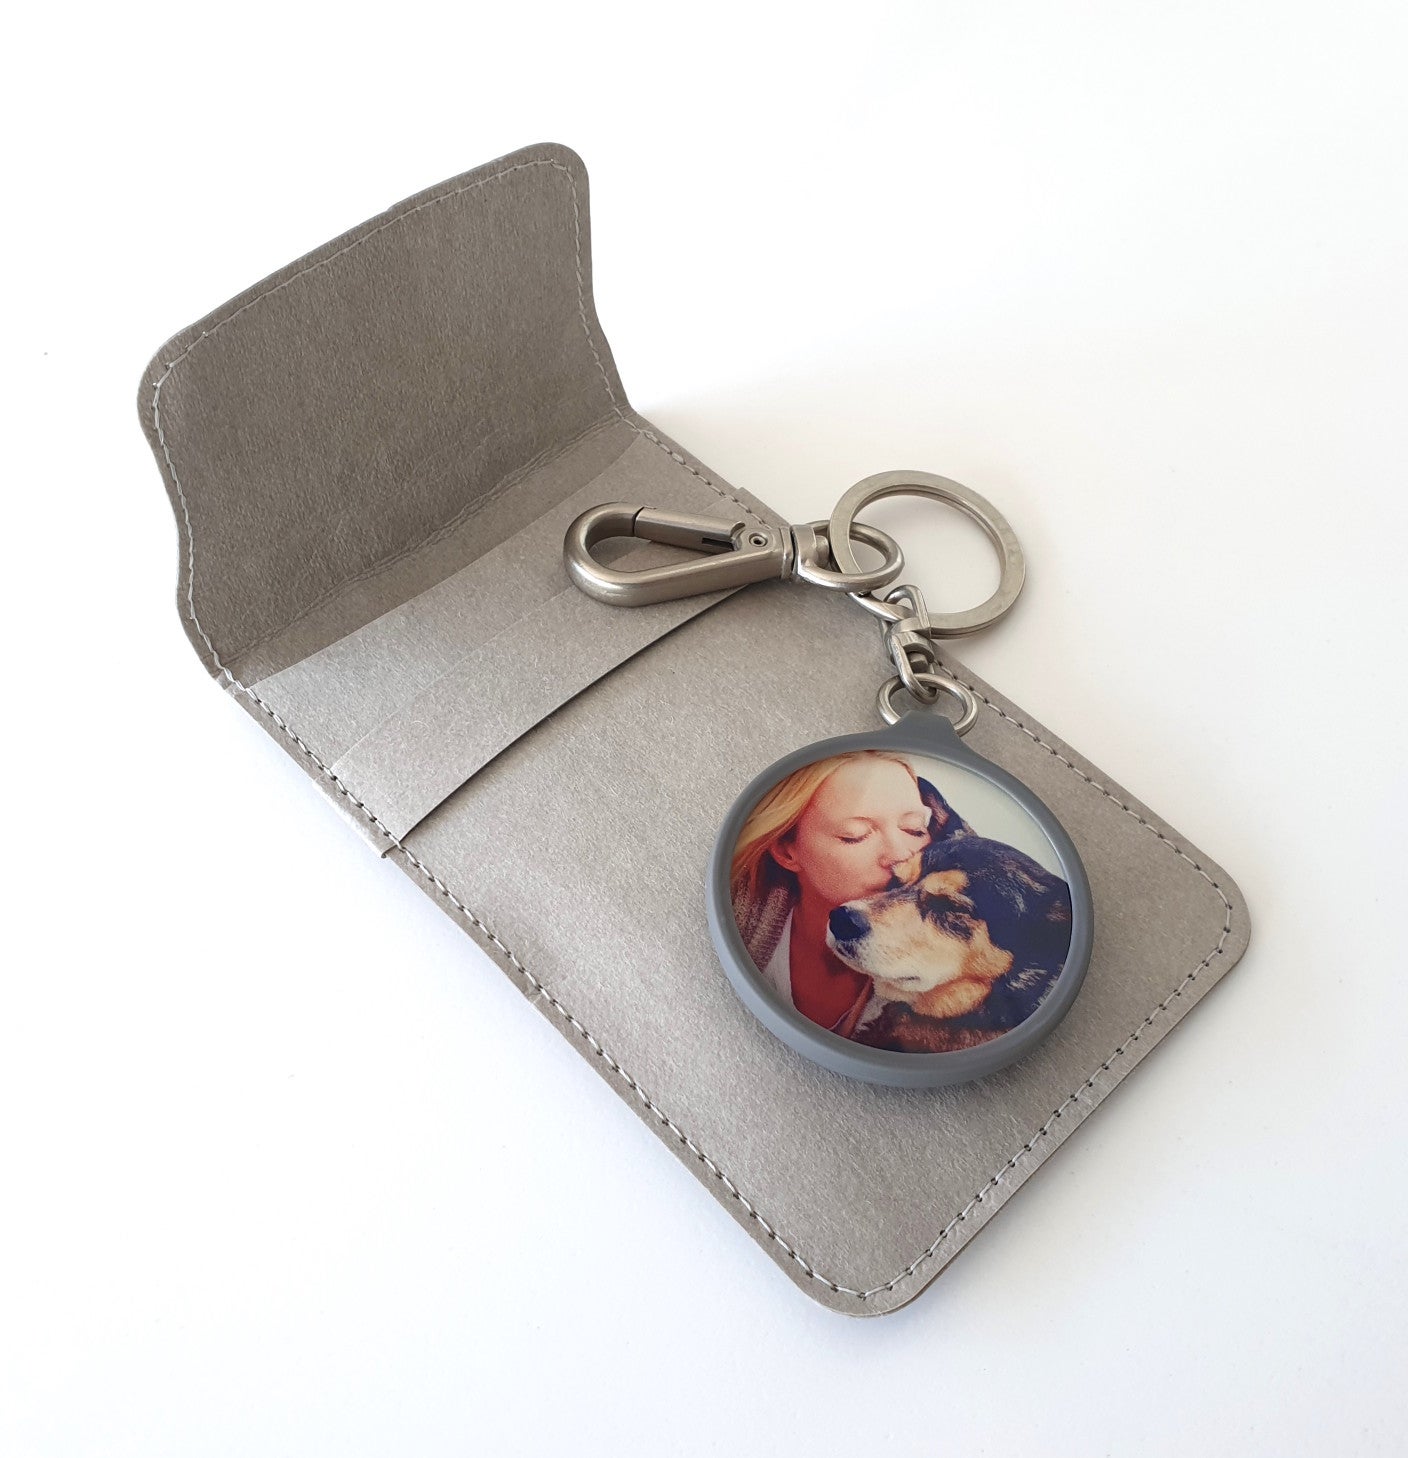 Image of personalised key fob with case